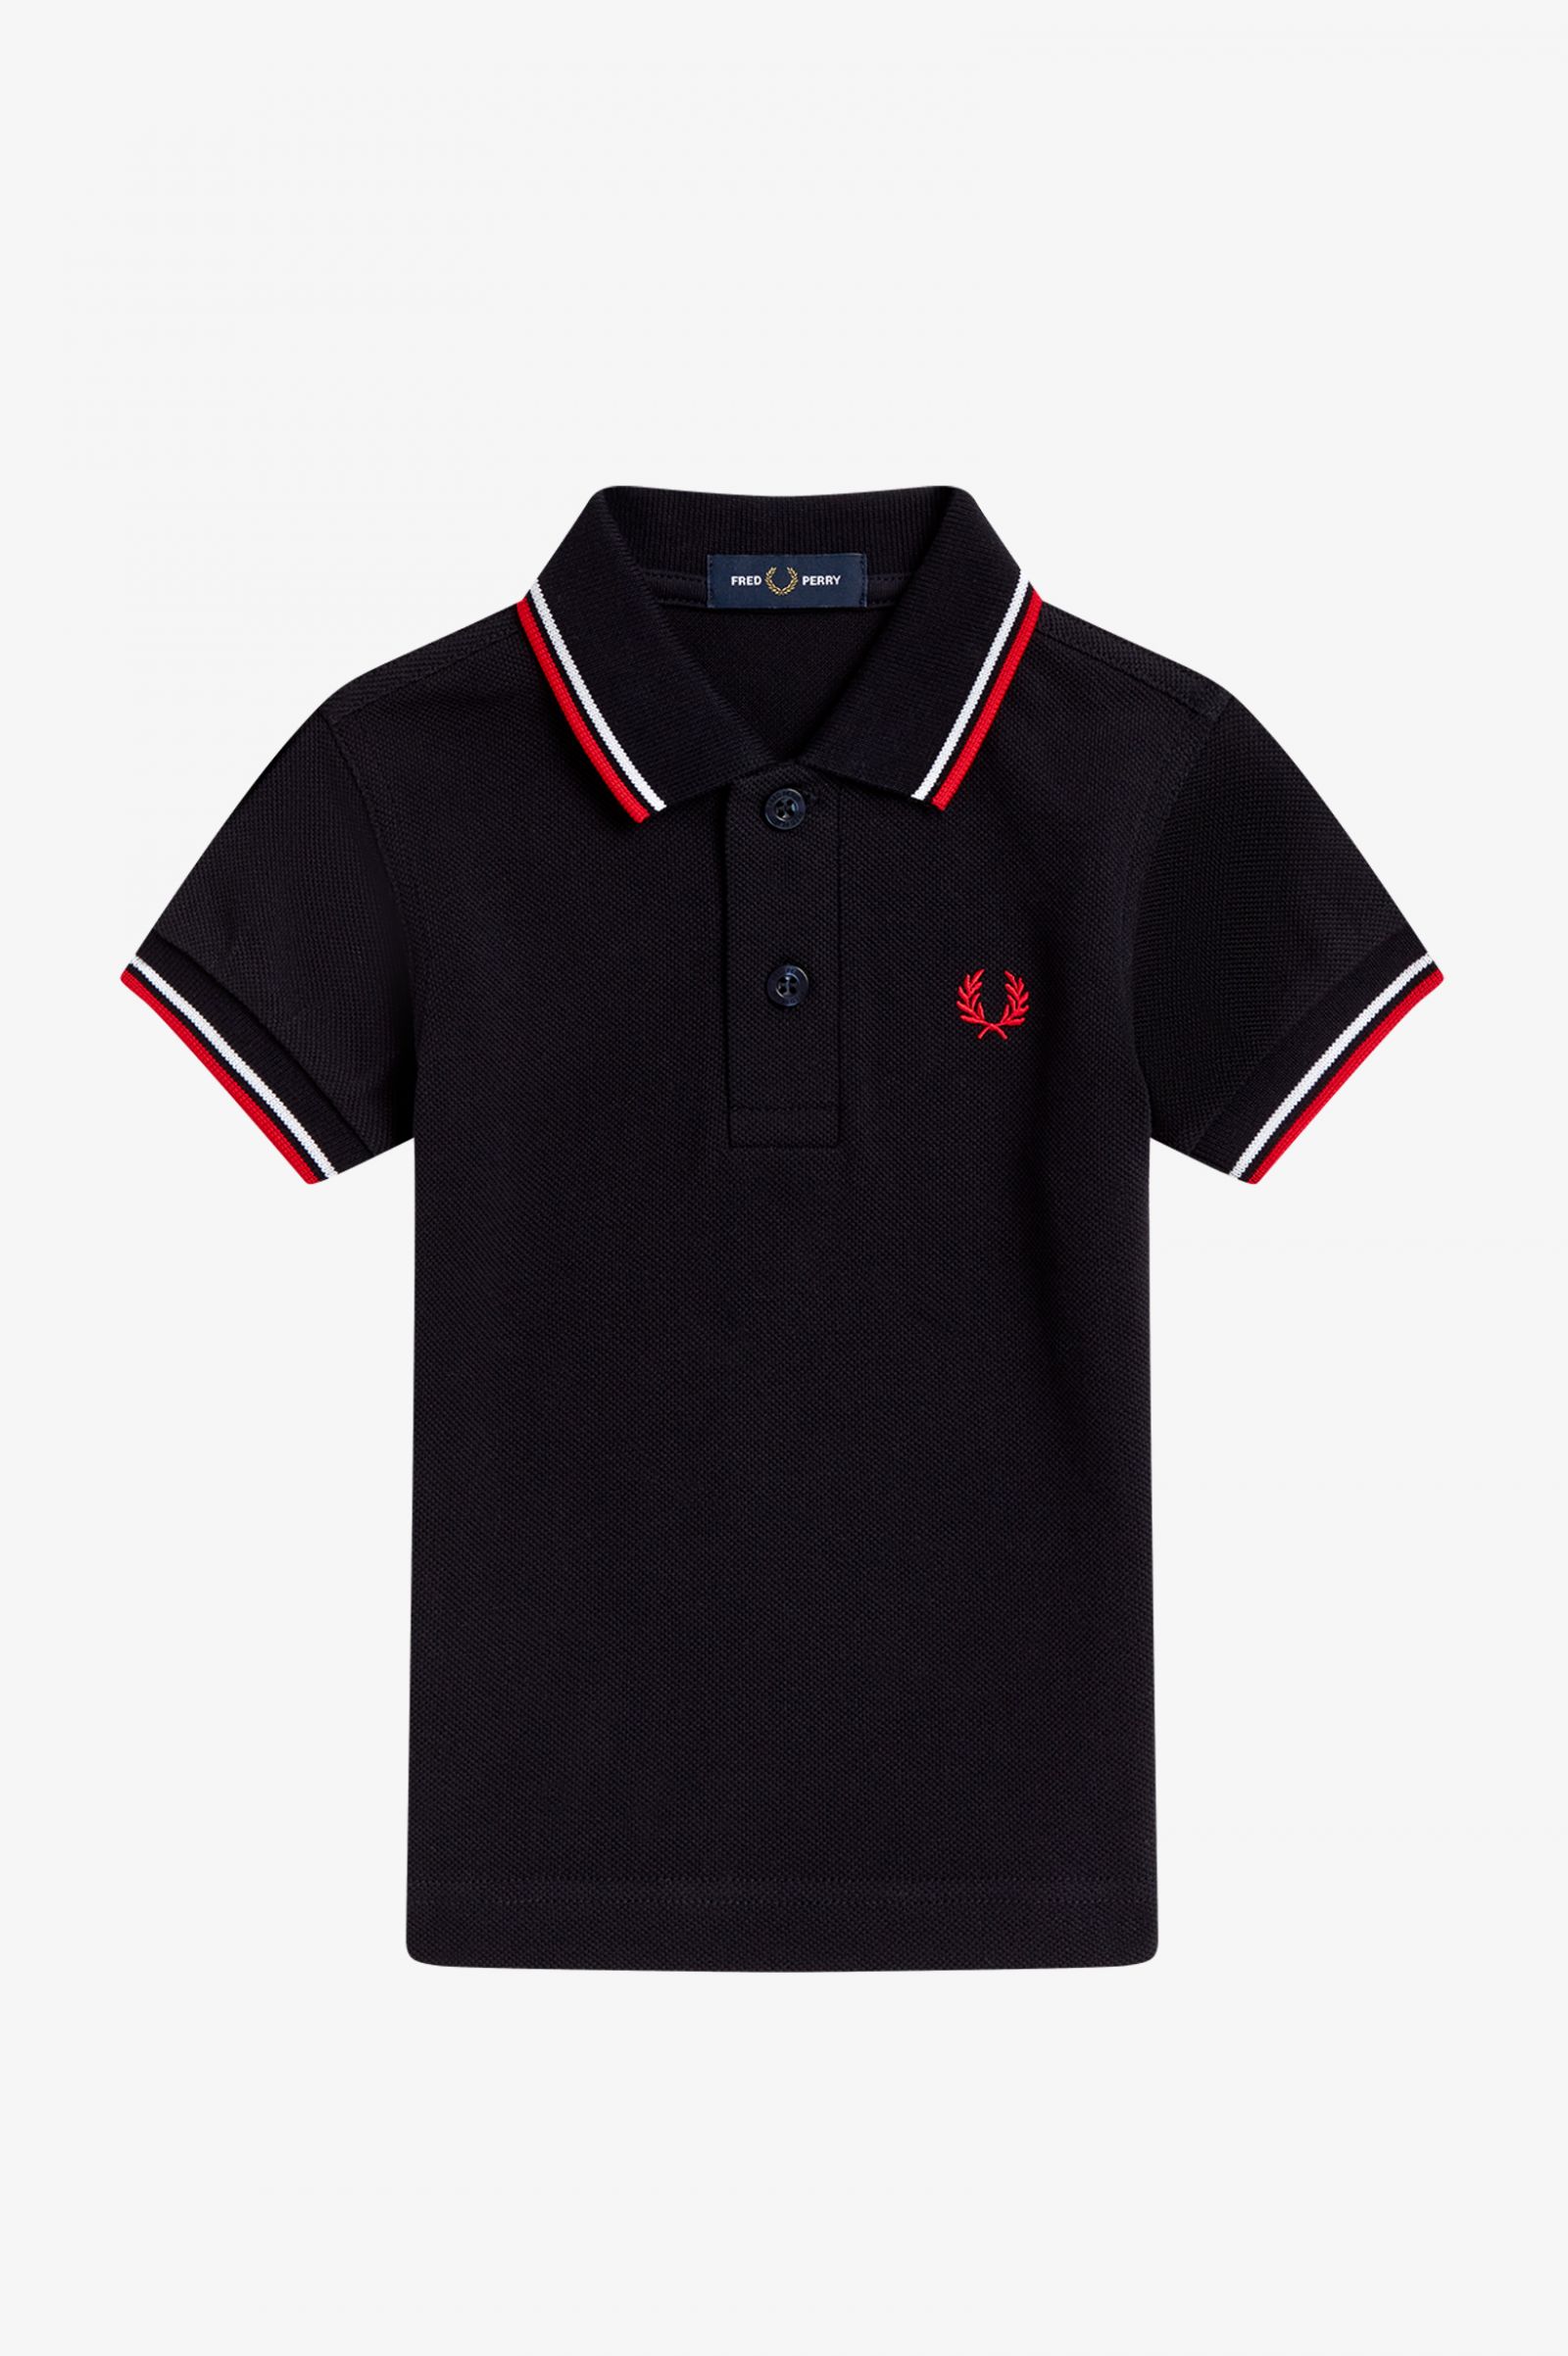 gijzelaar aanpassen verf My First Fred Perry Shirt - Navy / White / Red | Kids | Children's Polo  Shirts & Kids Designer Clothes | Fred Perry UK